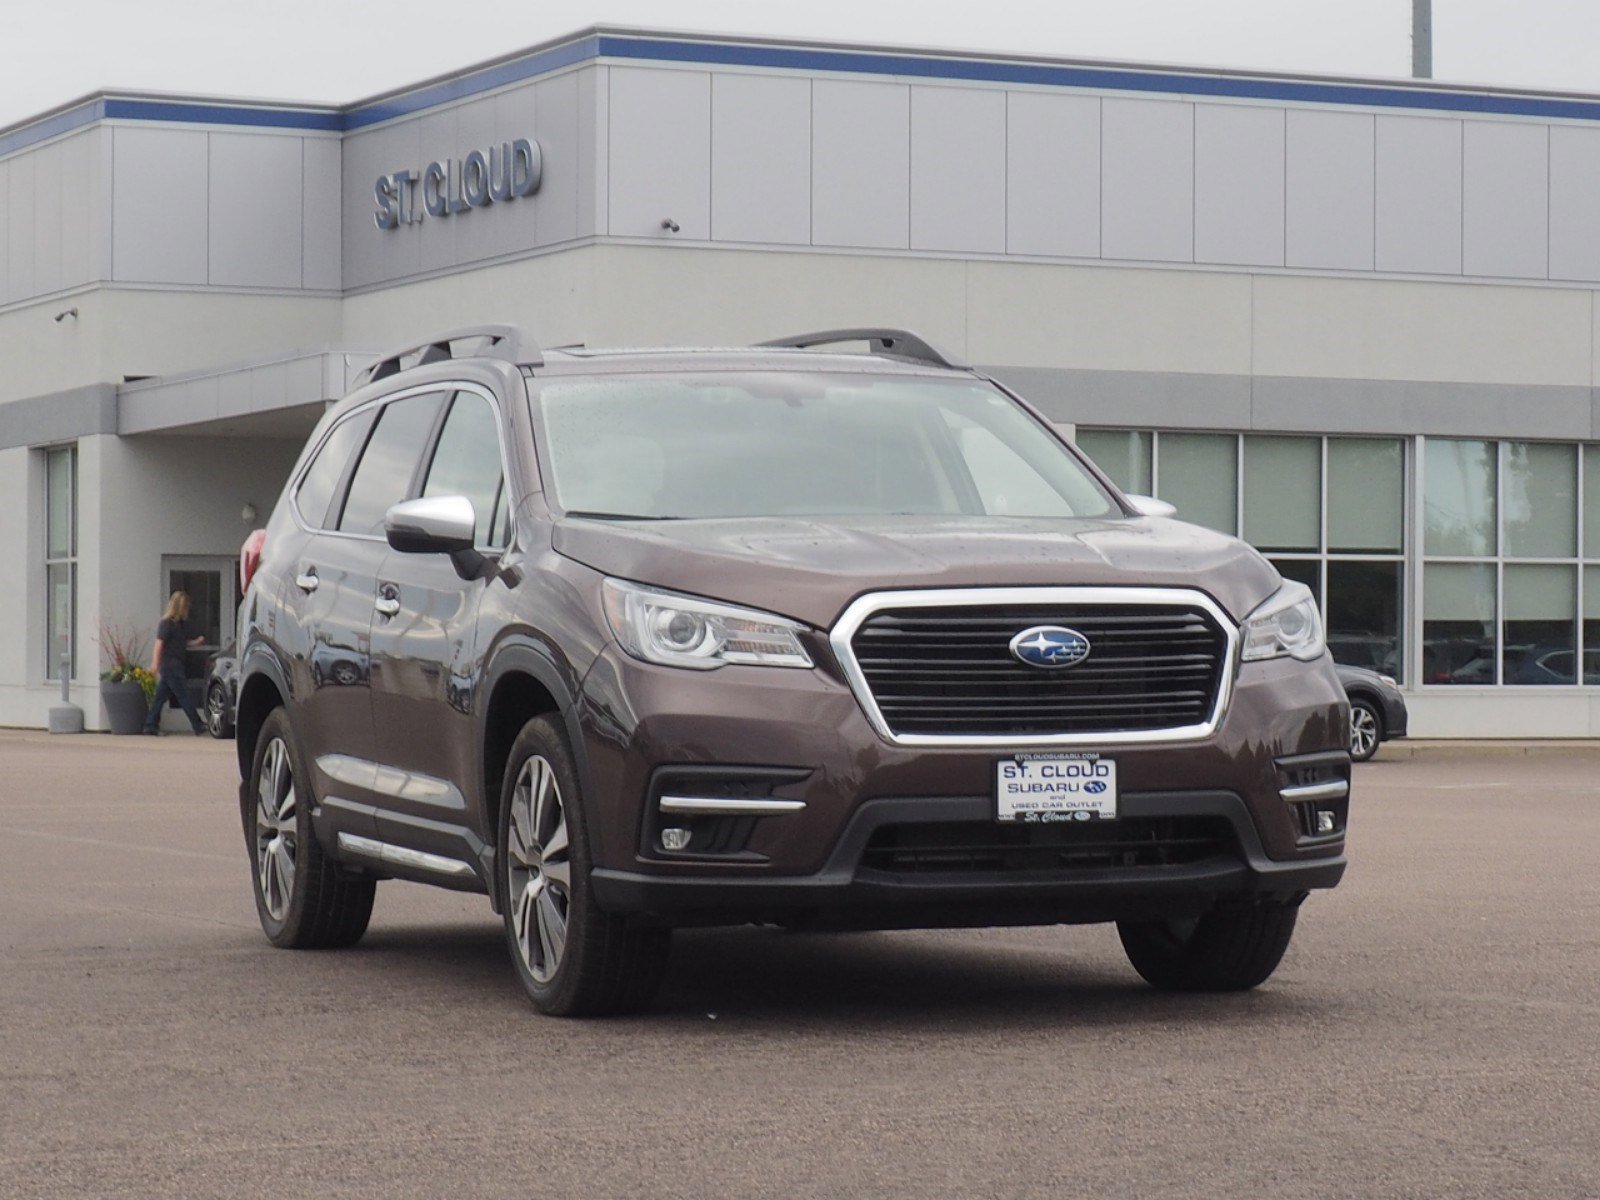 Used 2020 Subaru Ascent Touring with VIN 4S4WMARD4L3407327 for sale in Saint Cloud, Minnesota